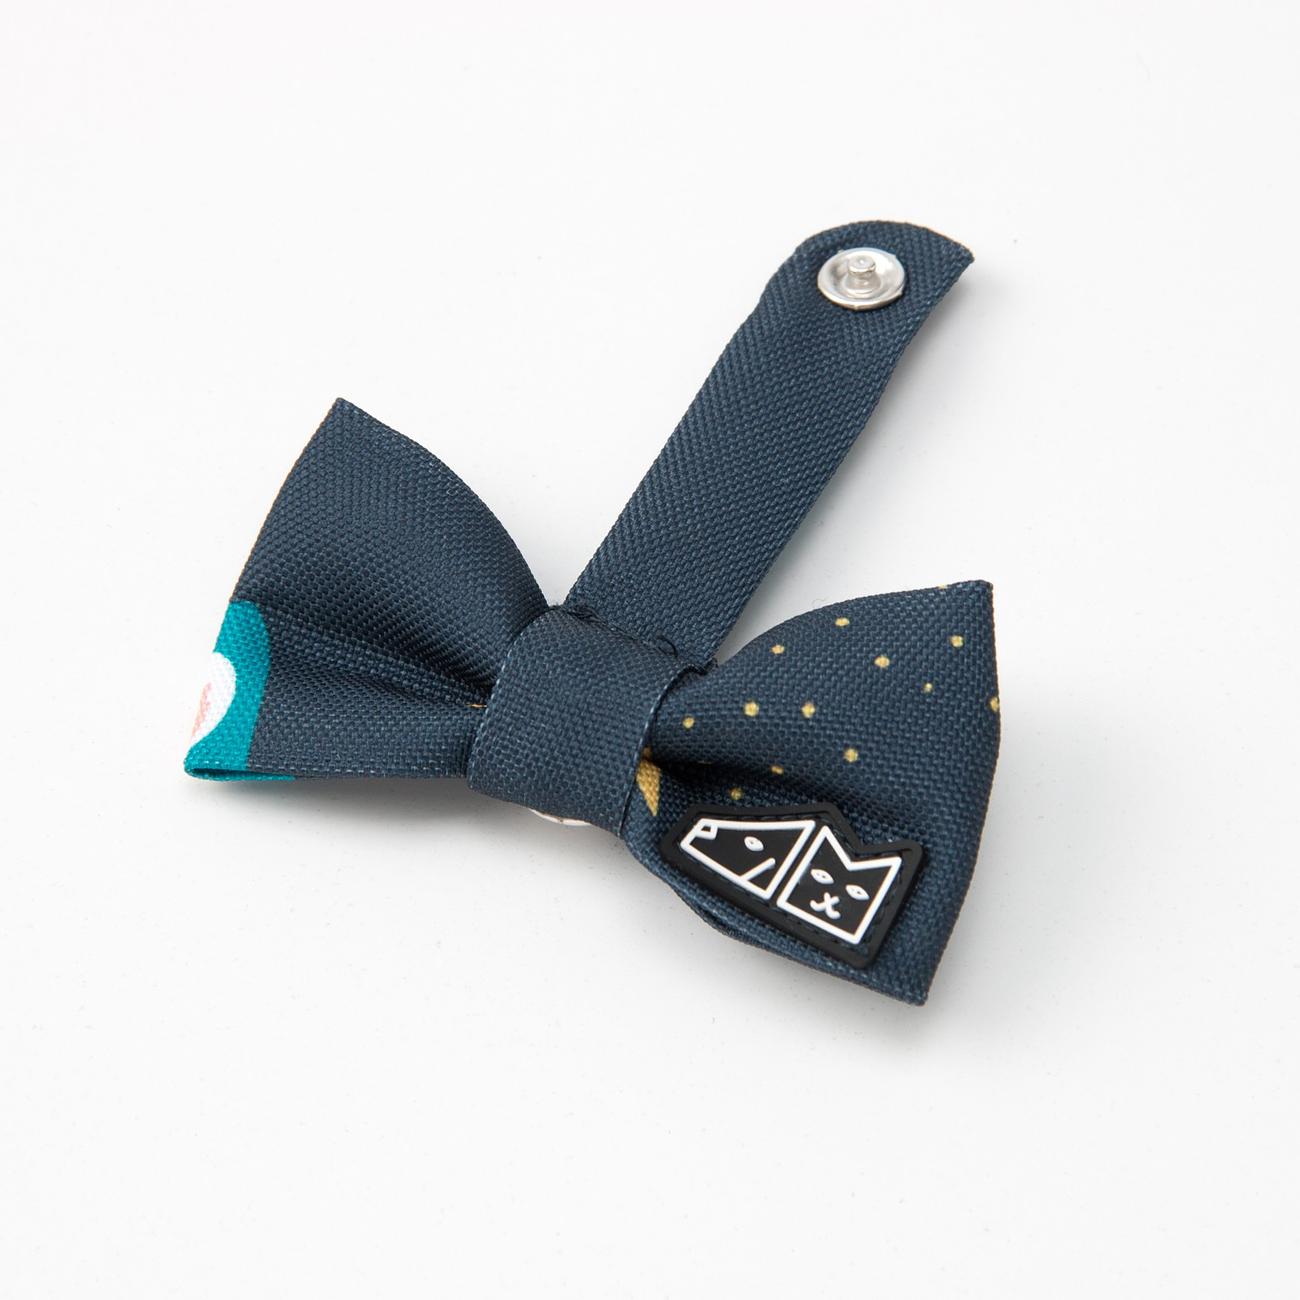 Bow tie "I need space" 